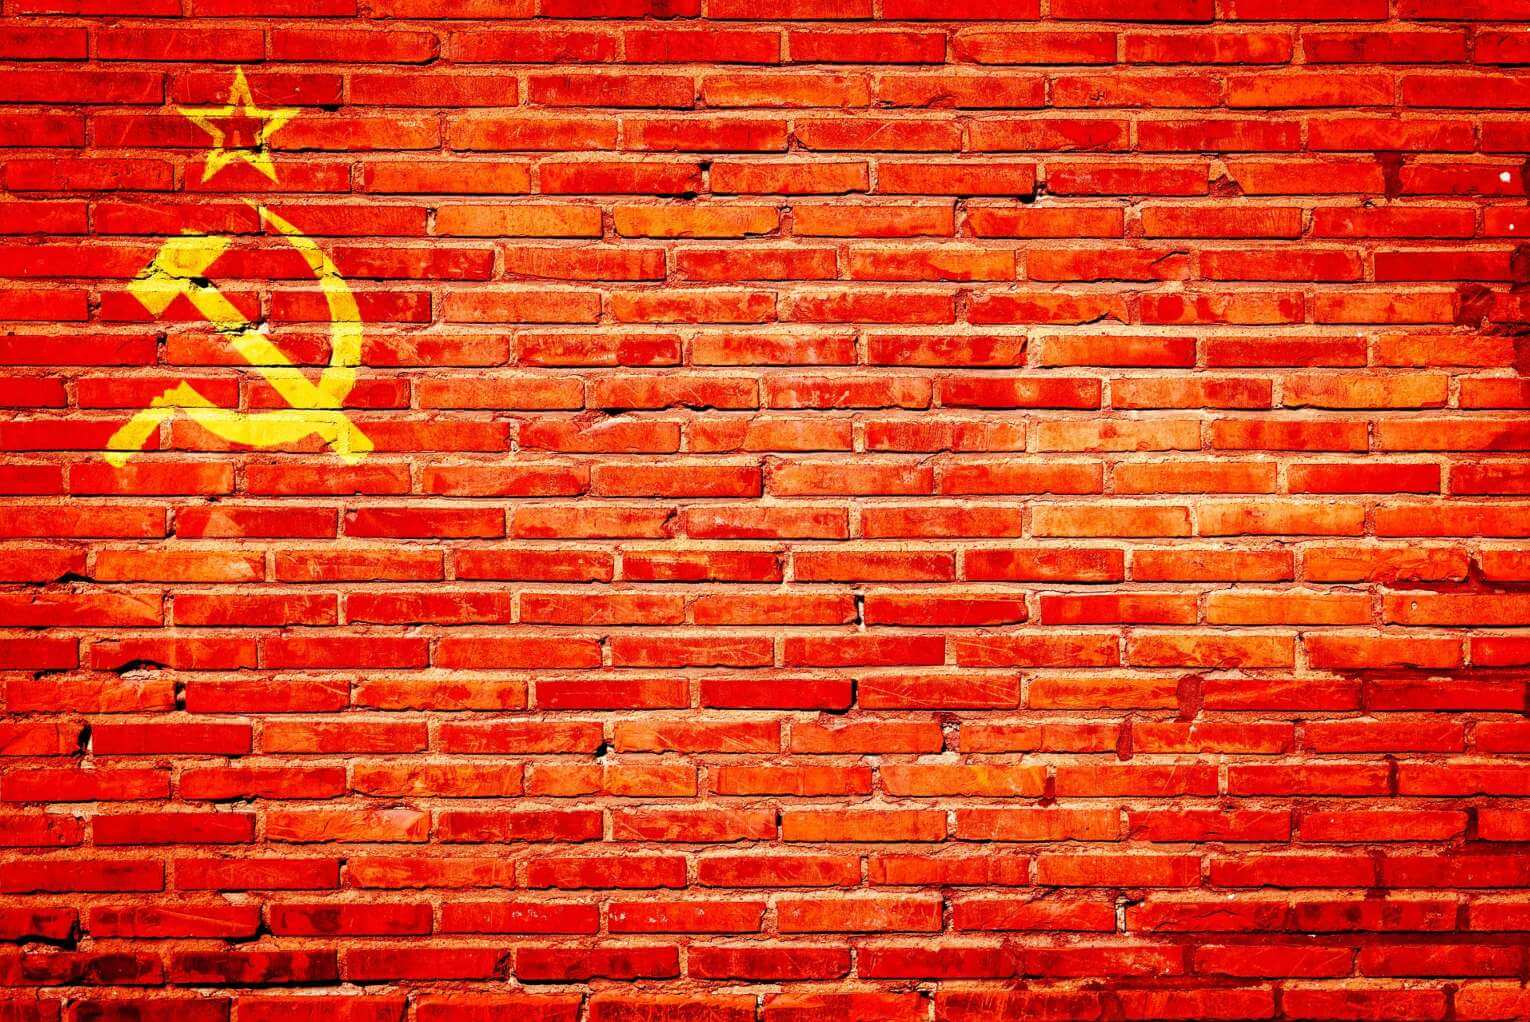 Why Does Our Civilization Choose Communism’s Servitude Over Liberty?